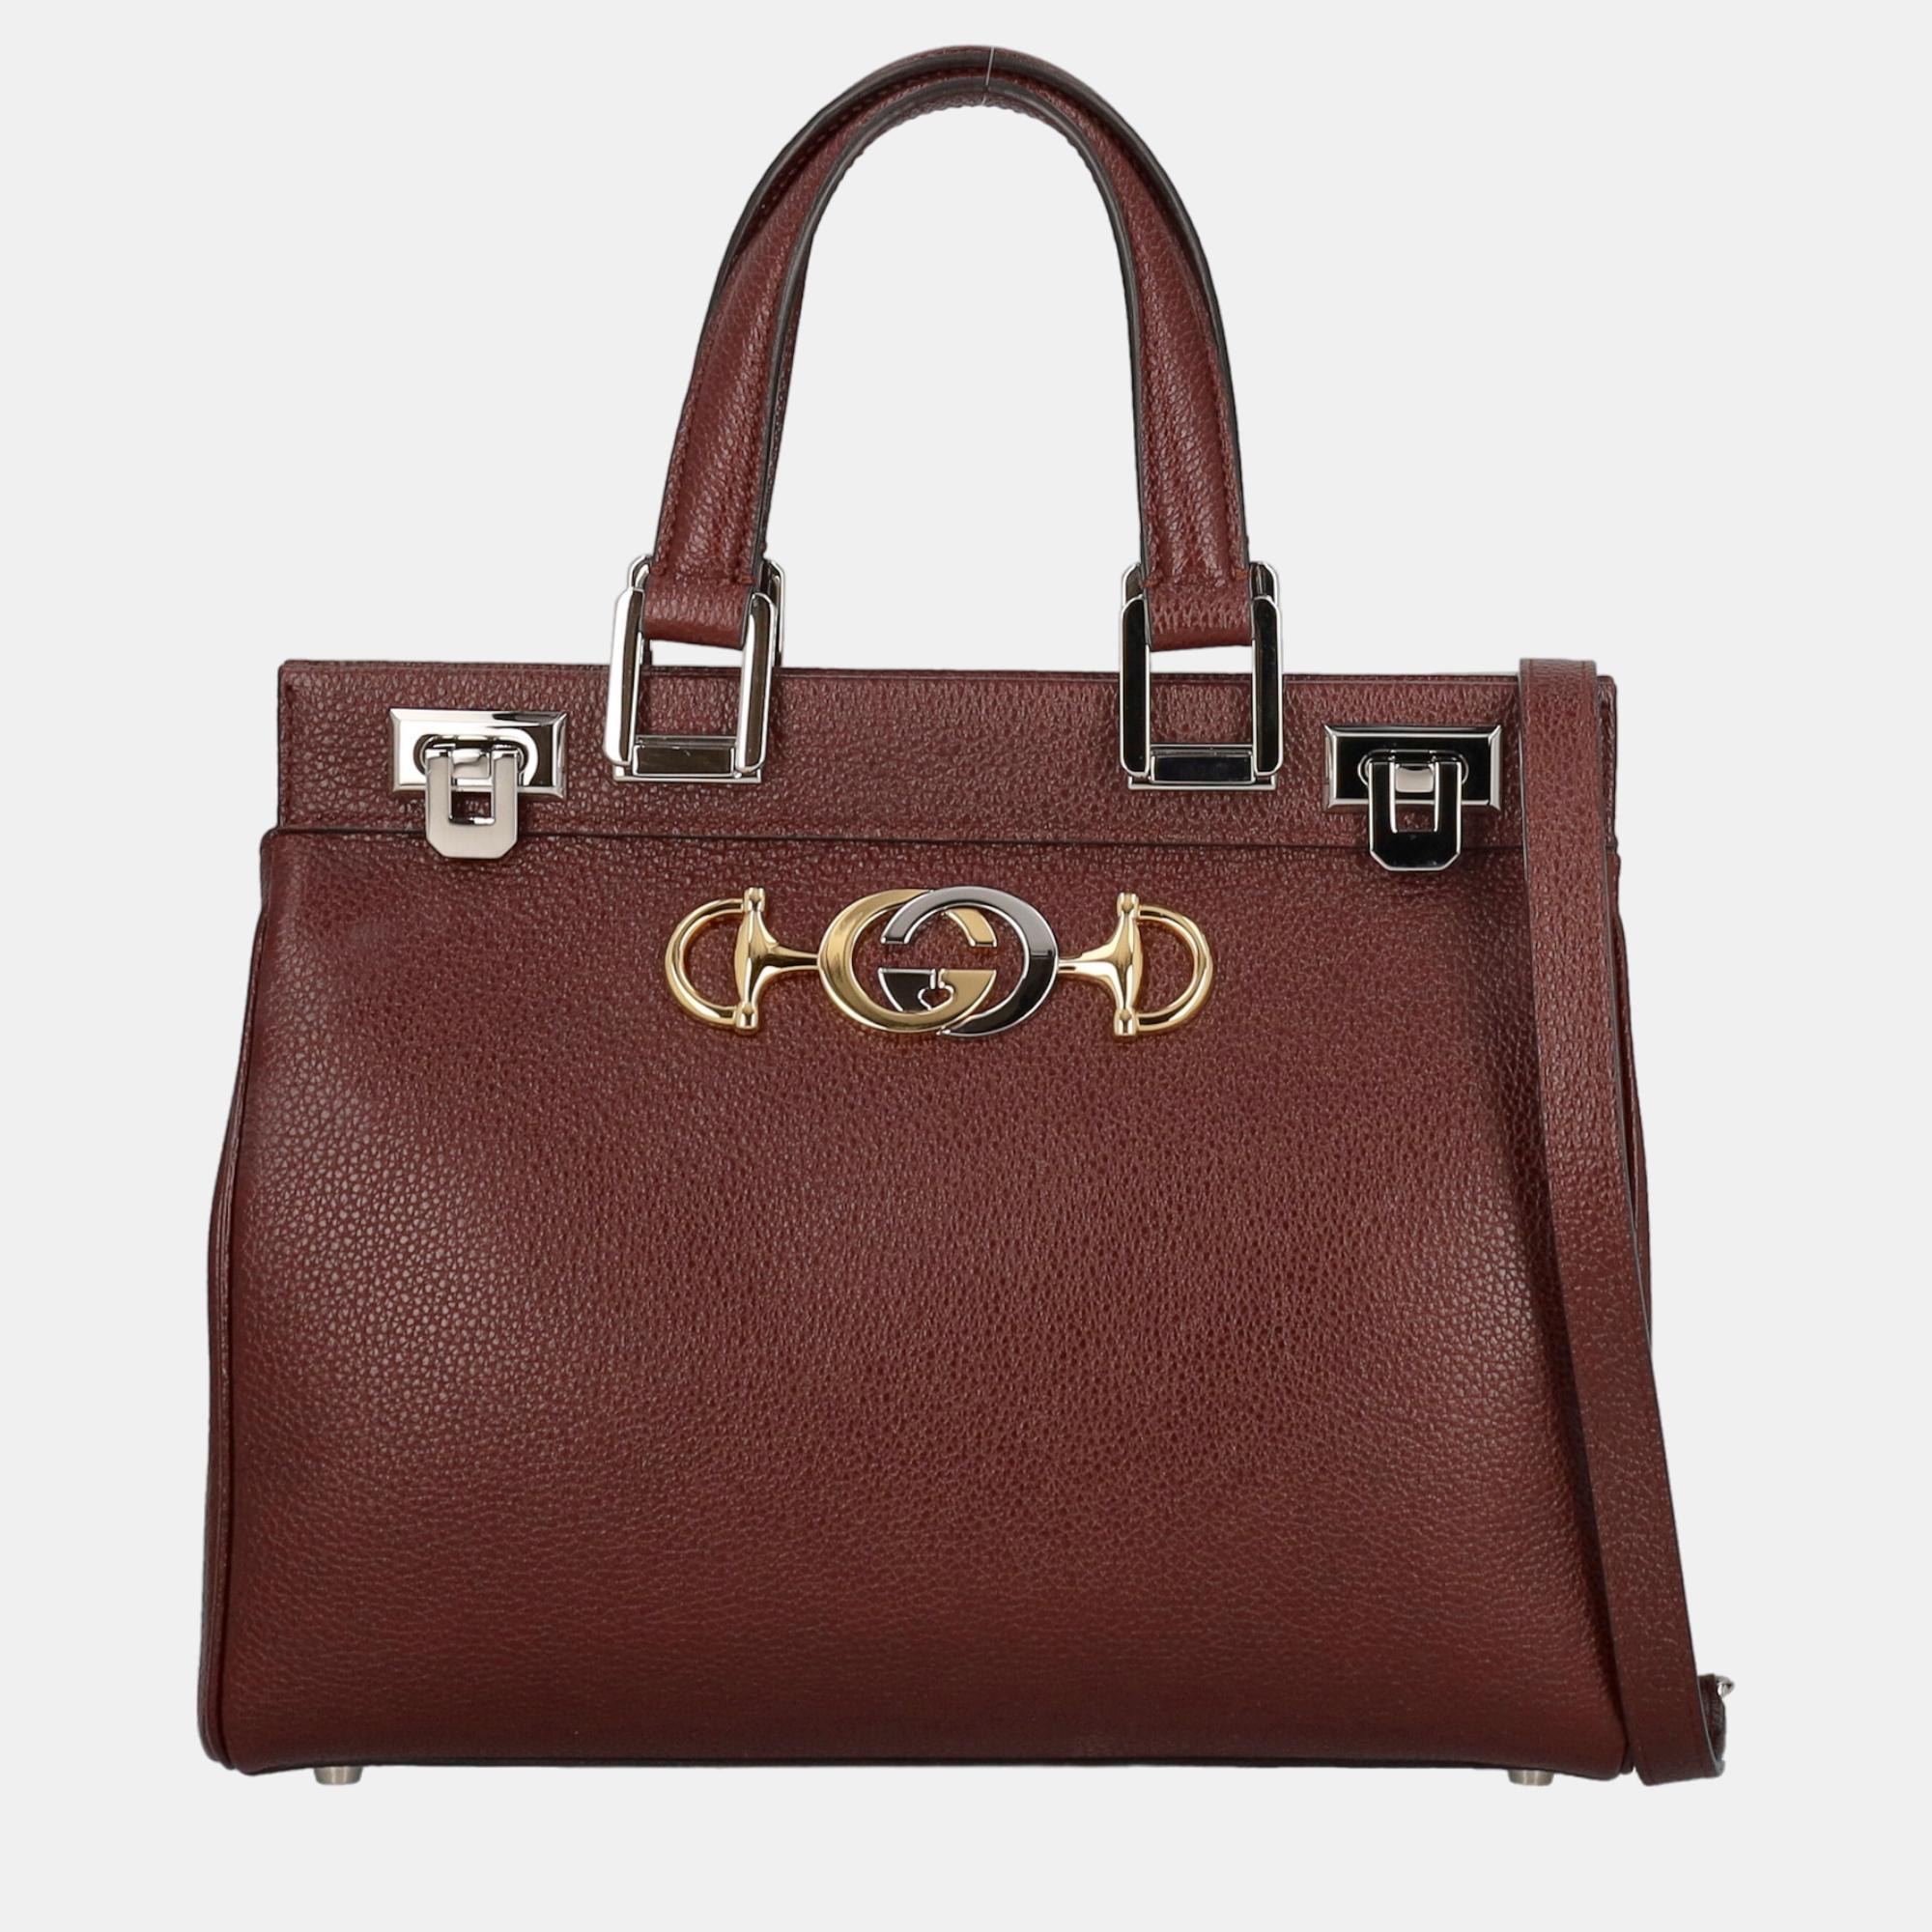 Gucci  Women's Leather Tote Bag - Burgundy - One Size